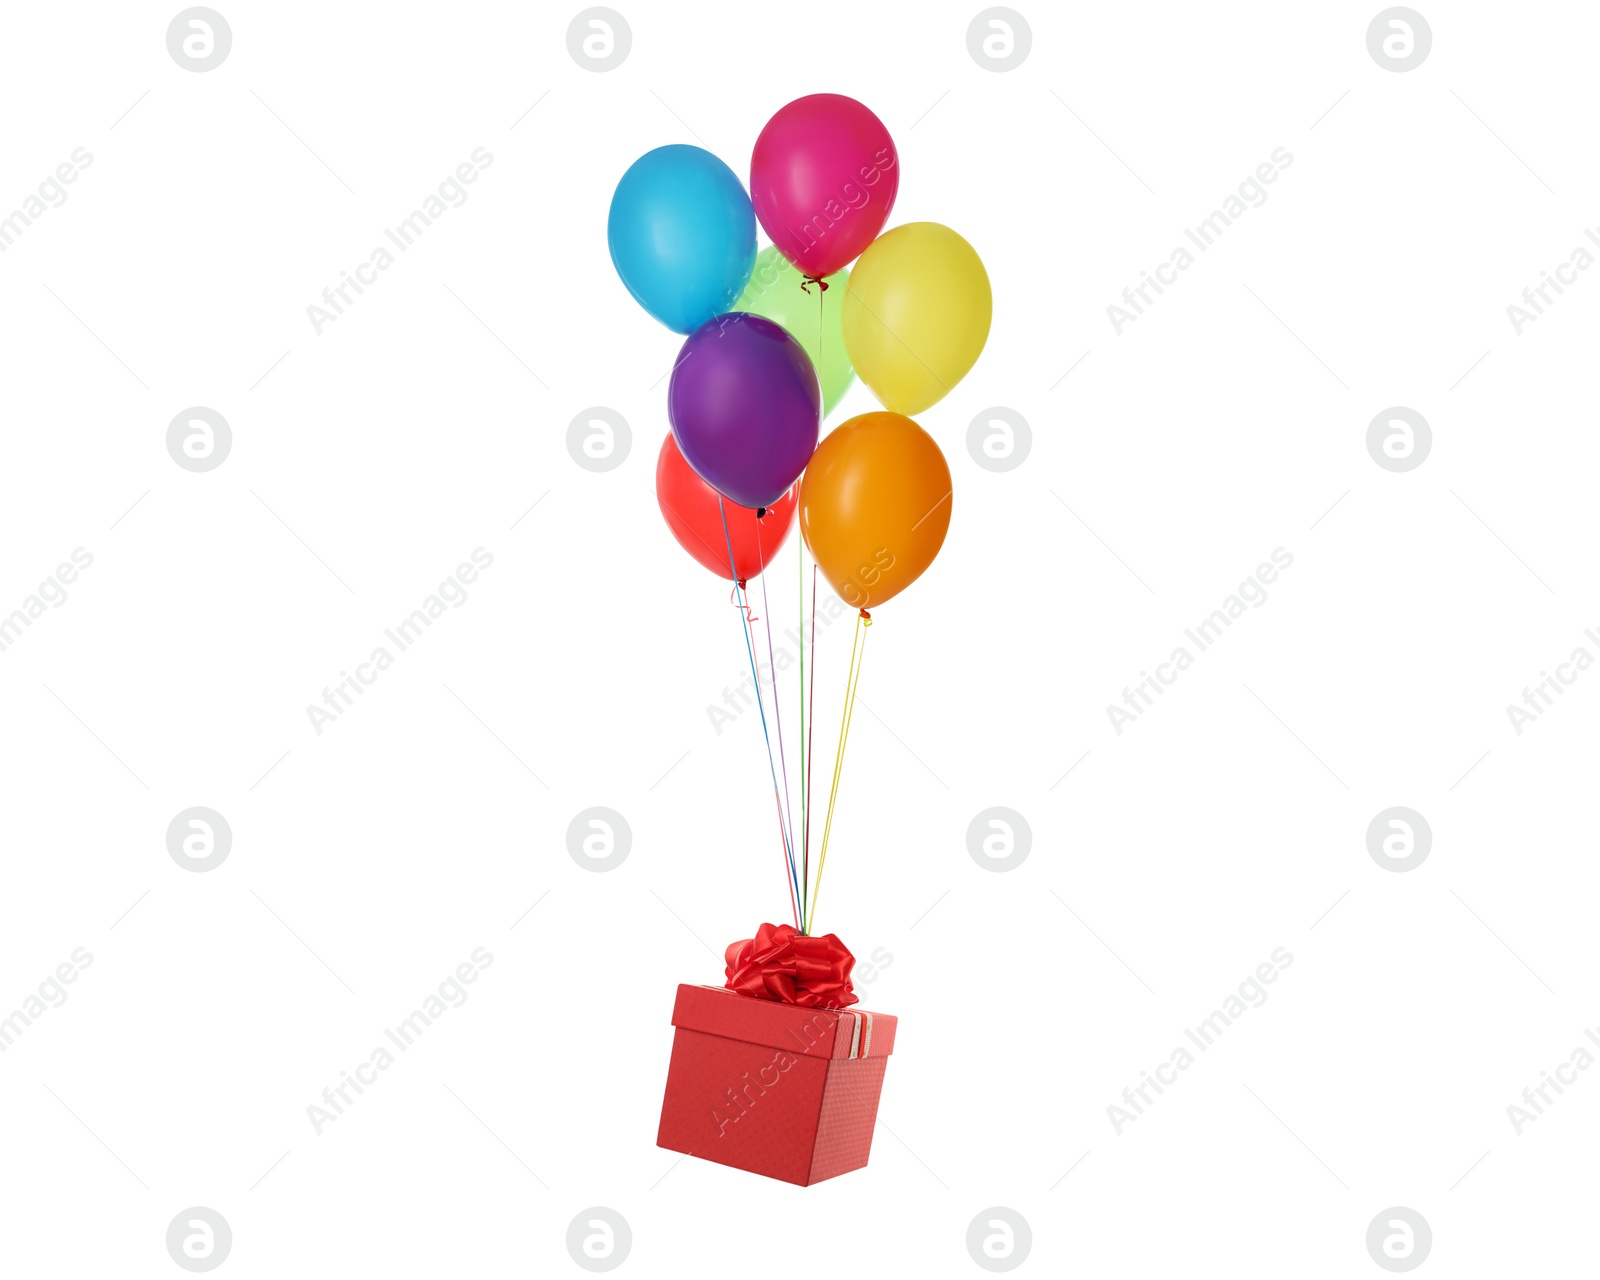 Image of Many balloons tied to red gift box on white background